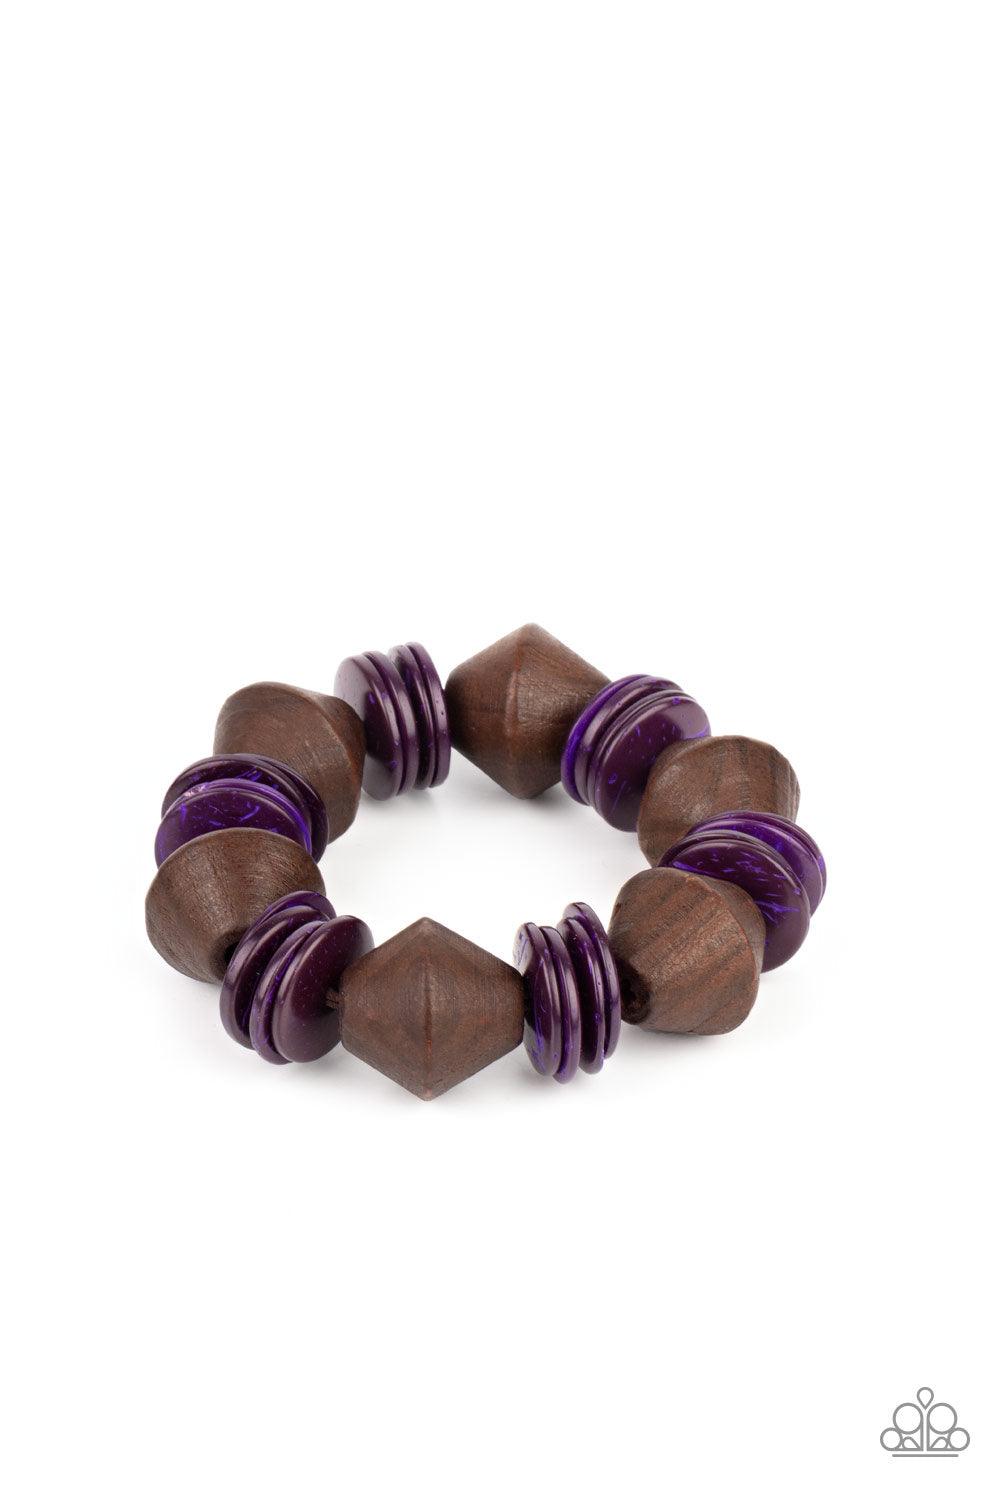 Paparazzi Accessories Bermuda Boardwalk - Purple Purple wooden discs and chunky brown wooden beads are threaded along a stretchy band around the wrist, creating a summery look. Sold as one individual bracelet. Jewelry